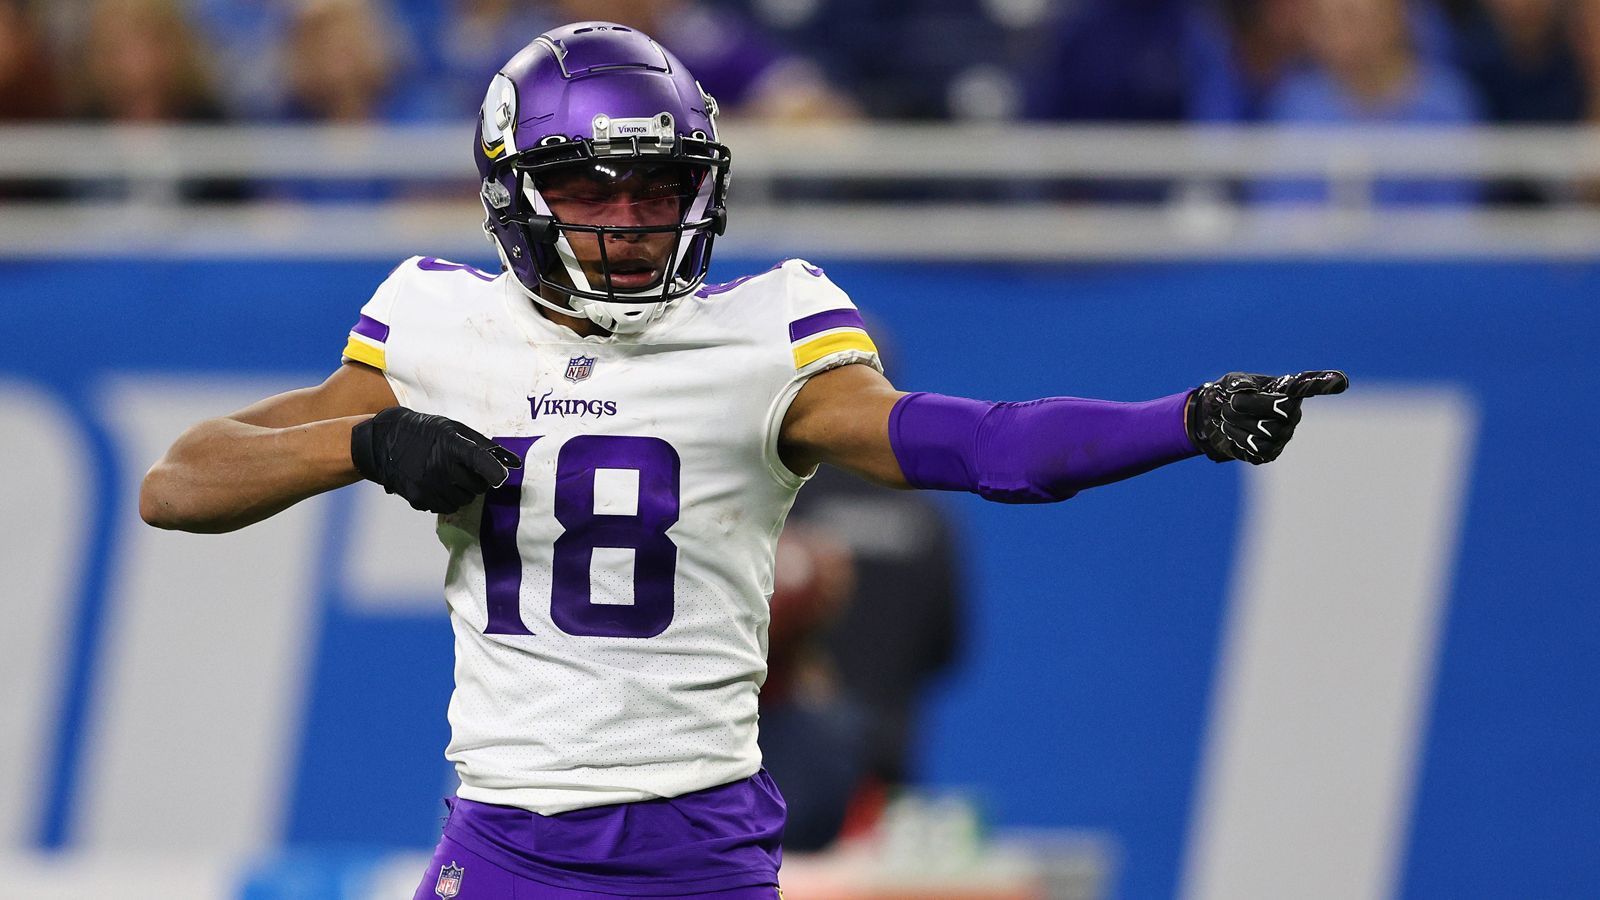 
                <strong>Justin Jefferson (Minnesota Vikings)</strong><br>
                &#x2022; <strong>Position</strong>: Wide Receiver<br>&#x2022; <strong>Durchschnittlicher Top-Verdiener Wide Receiver</strong>: Tyreek Hill (<strong></strong> Millionen Dollar jährlich)<br>&#x2022; <strong>Durchschnittlicher Verdienst Justin Jefferson</strong>: <strong>3,3</strong> Millionen Dollar jährlich<br>&#x2022; <strong>Top-Verdiener Wide Receiver 2022</strong>: Kenny Golladay (<strong>21,2</strong> Millionen Dollar)<br>&#x2022; <strong>Verdienst 2022 </strong><strong>Justin Jefferson</strong>: <strong>4,2</strong> Millionen Dollar<br>
              